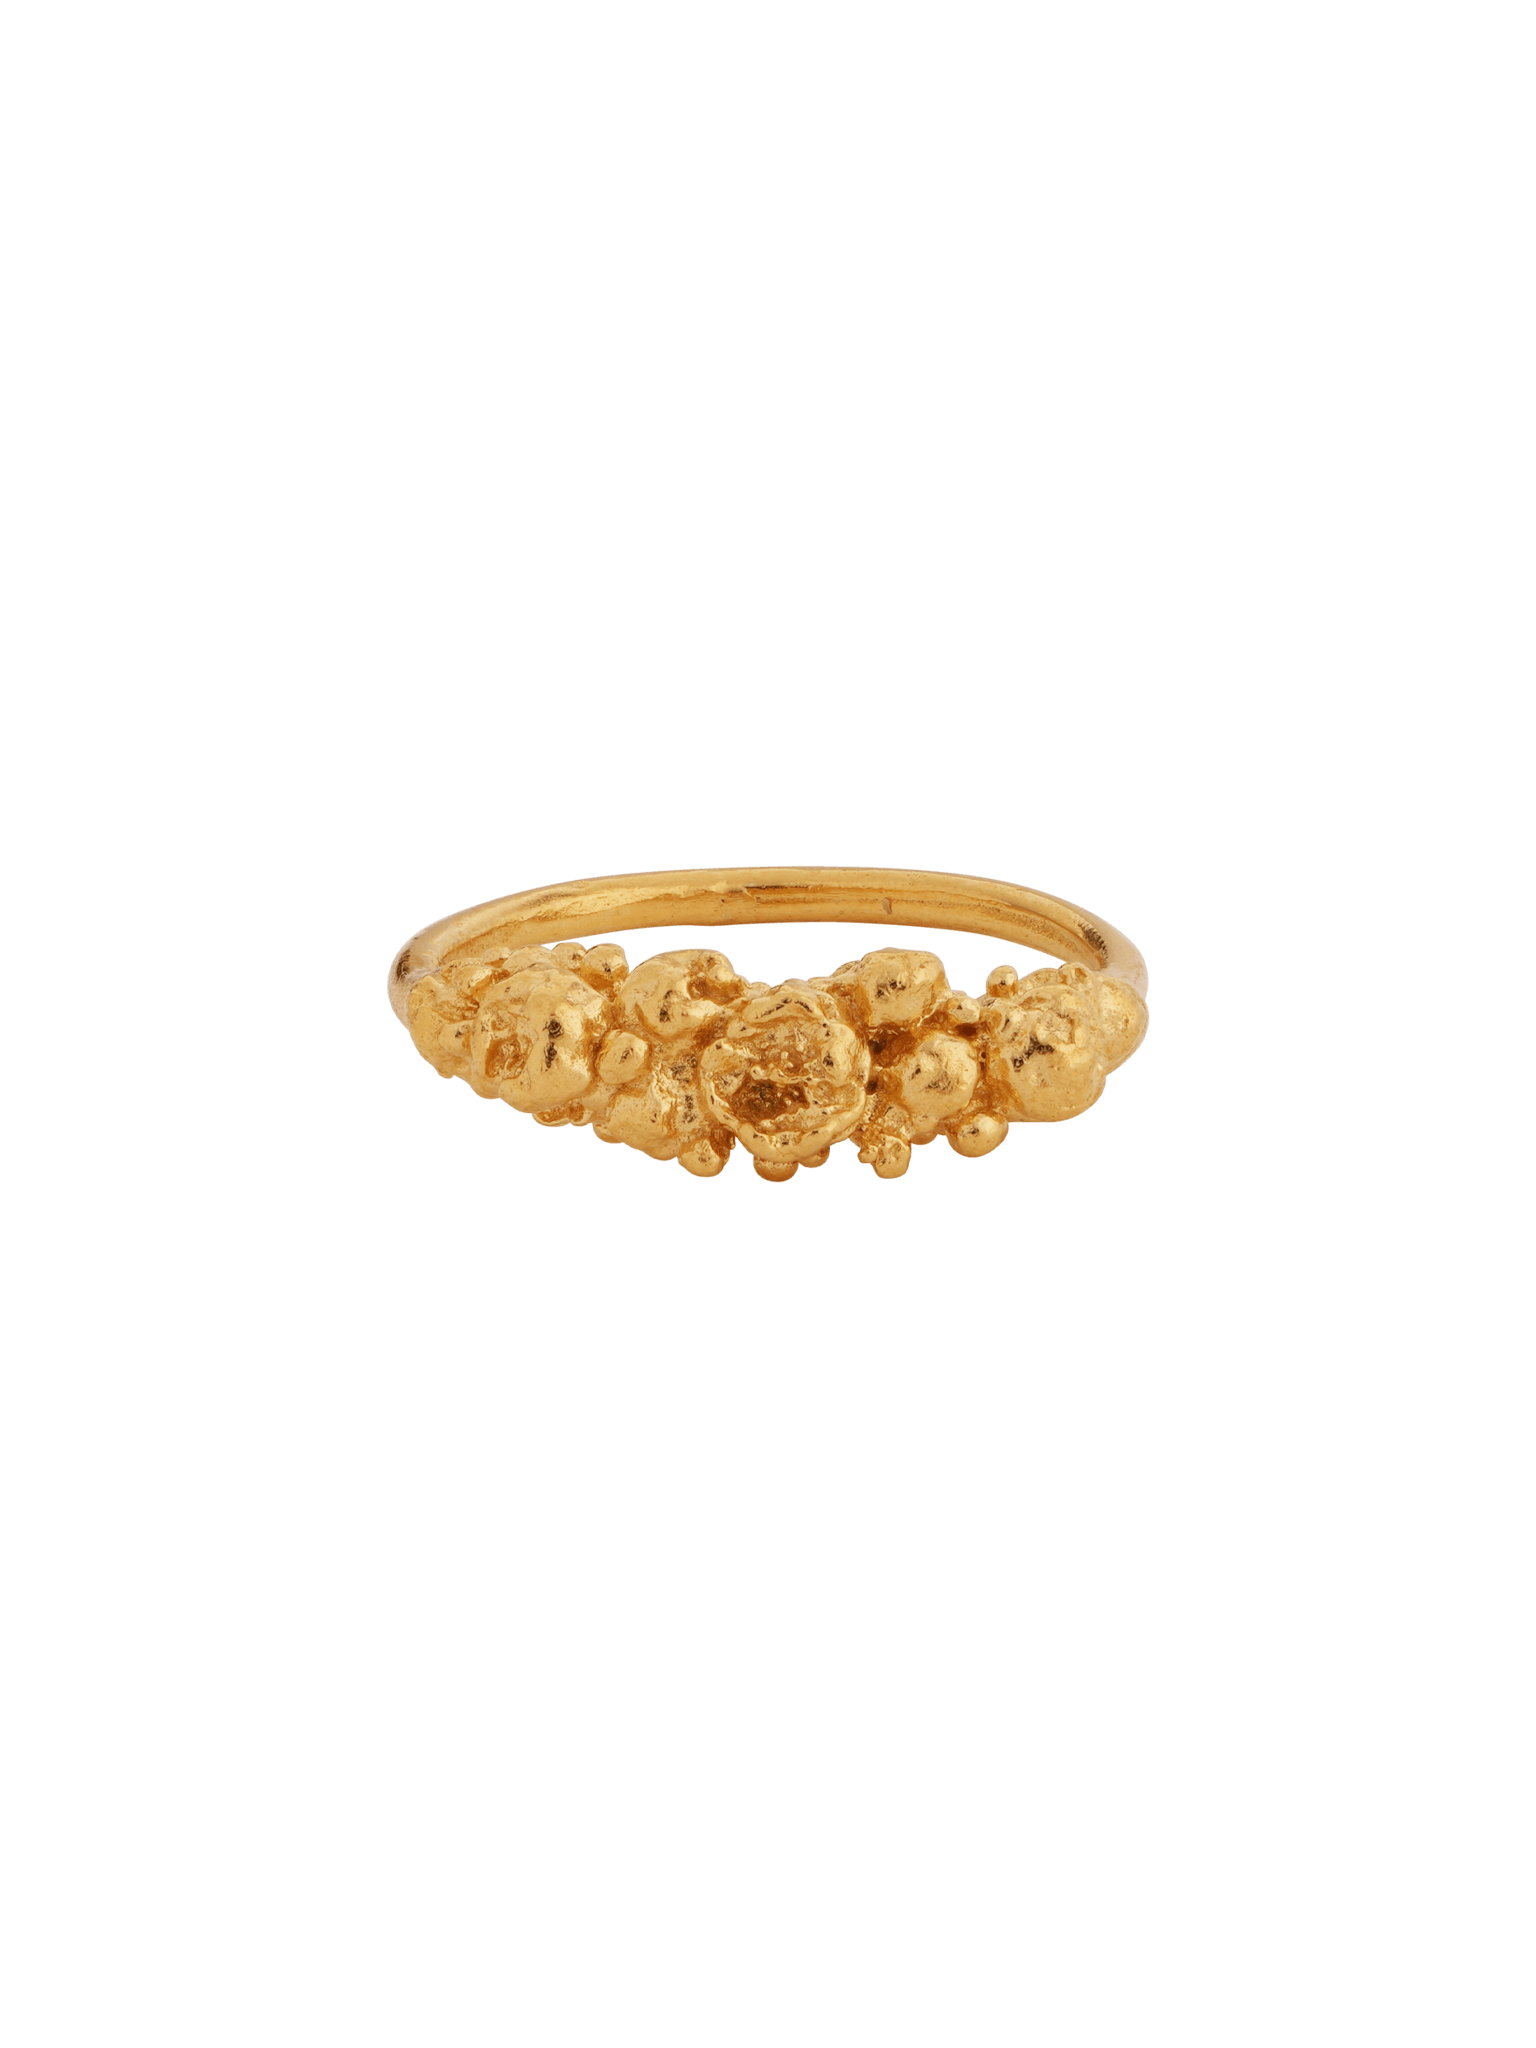 A Cremilde Bispo Jewellery Blooms Ring in Gold plated sterling silver, adorned with intricate flowers, showcasing the beauty of the nature.